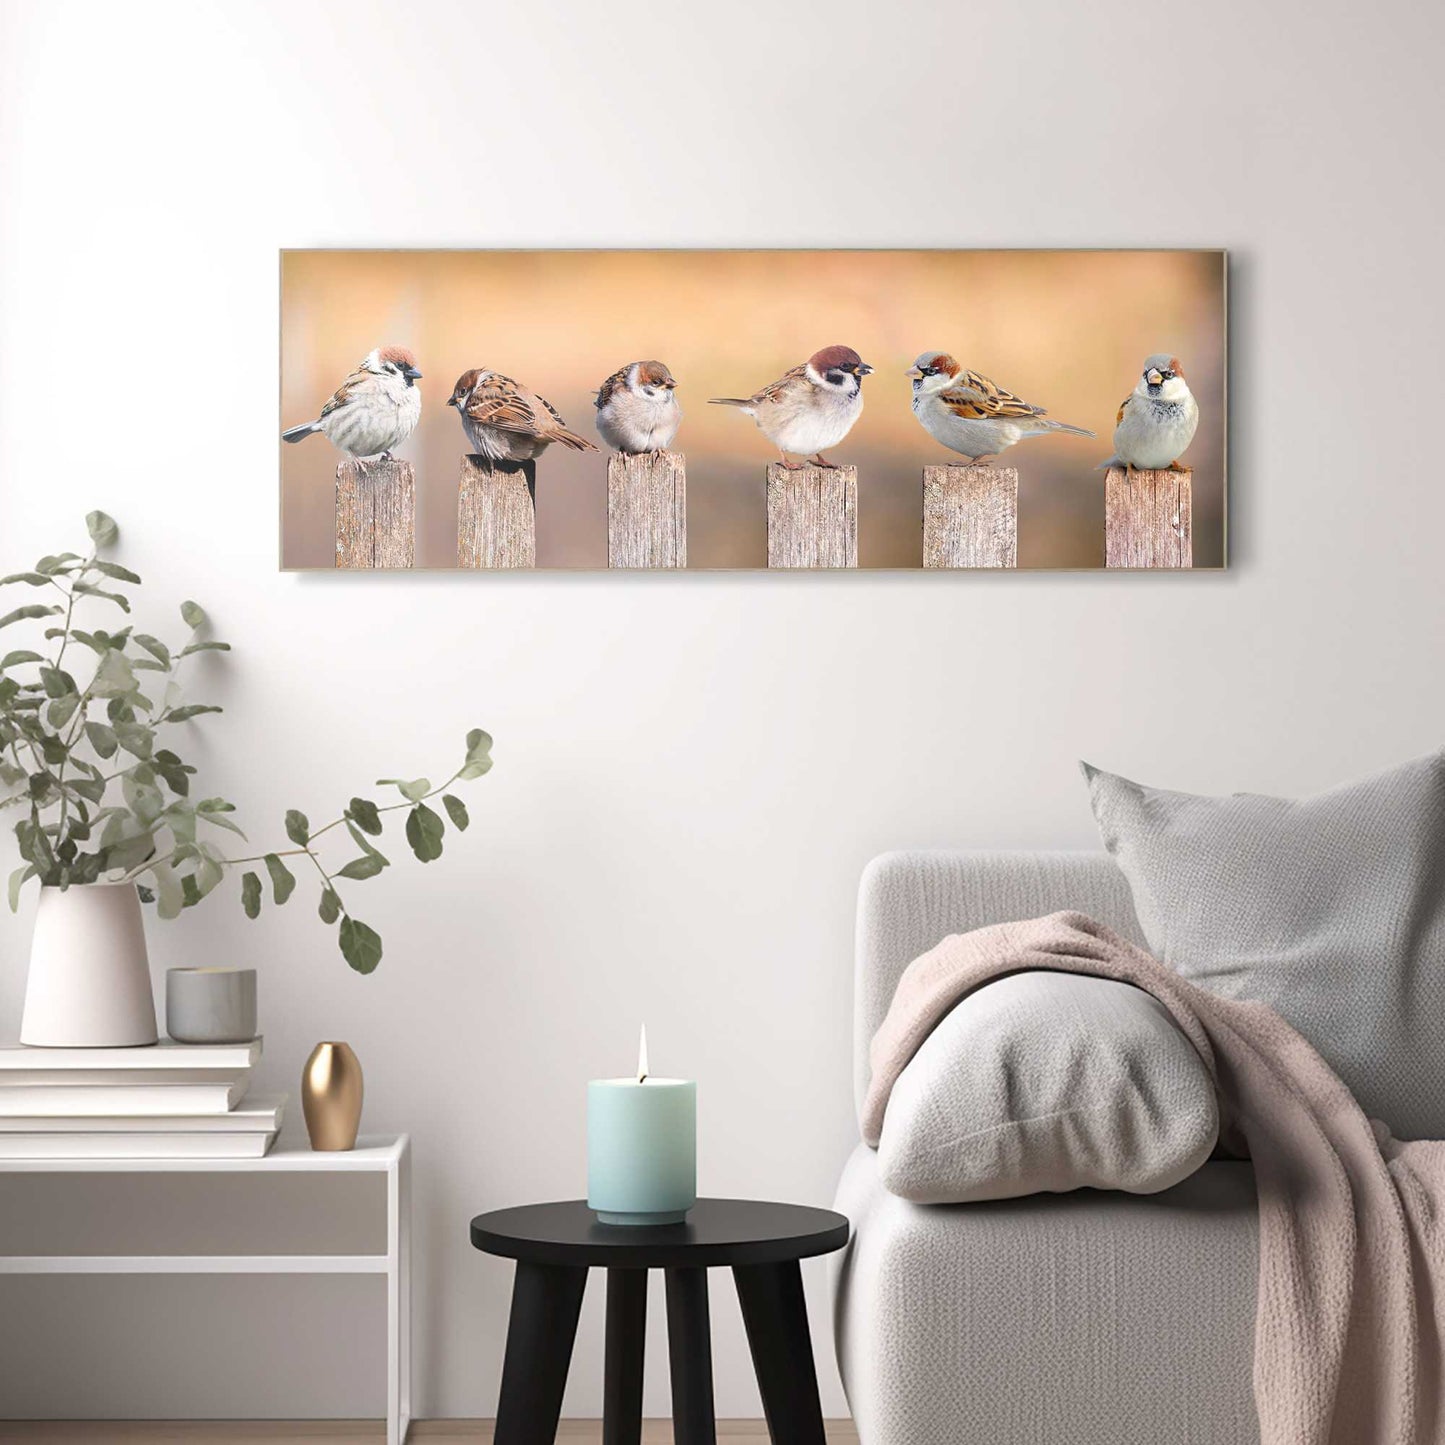 Framed Picture Sparrows 30x90